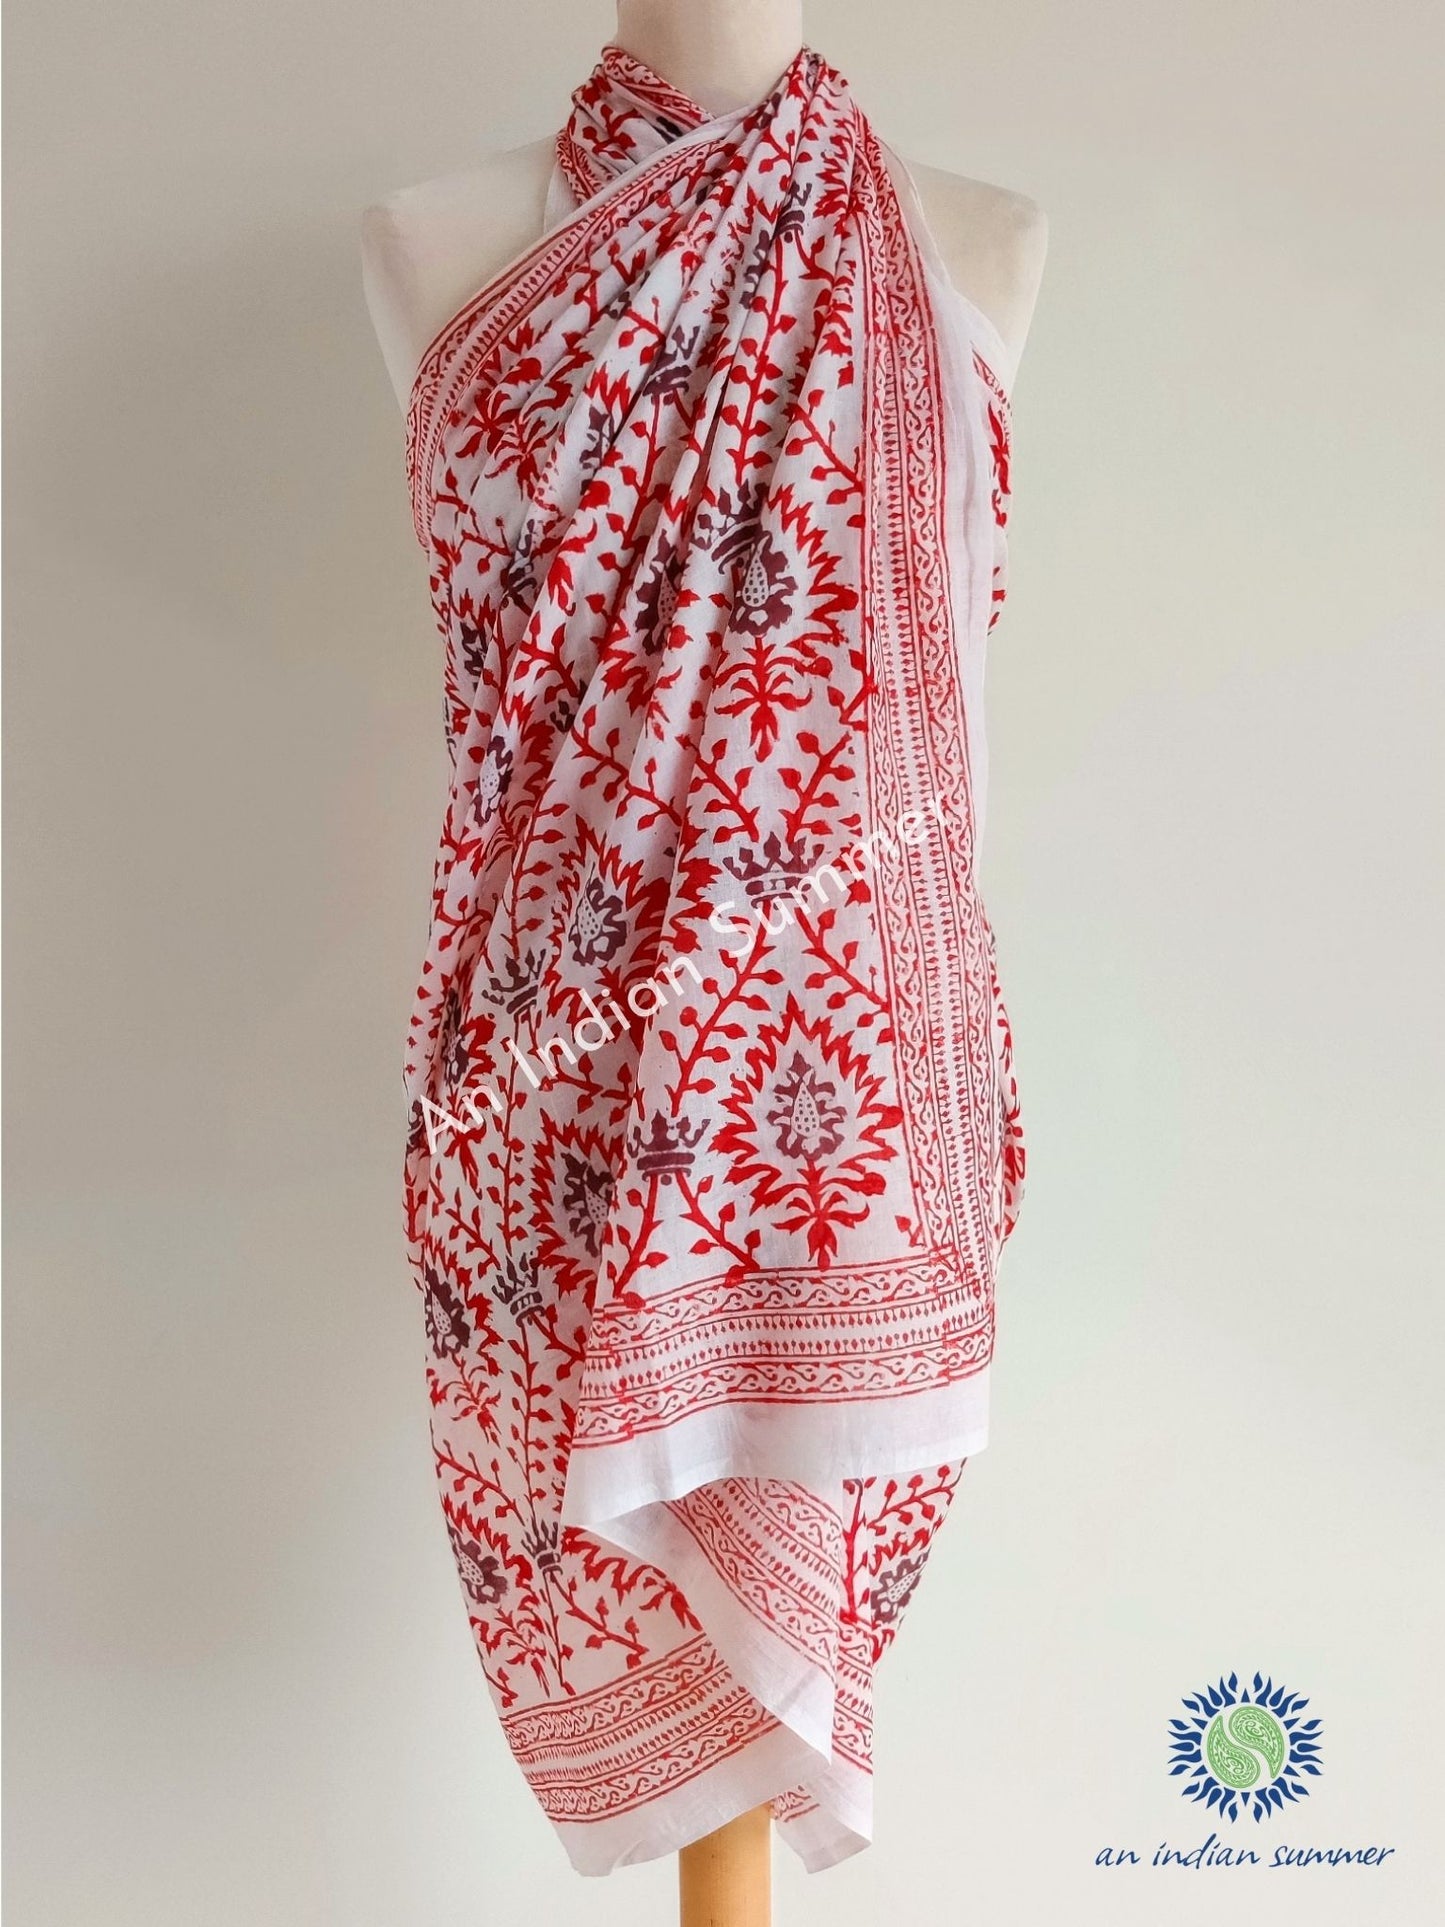 Flame Sarong Pareo | Orange | Hand Block Printed | Soft Cotton Voile | An Indian Summer | Seasonless Timeless Sustainable Ethical Authentic Artisan Conscious Clothing Lifestyle Brand